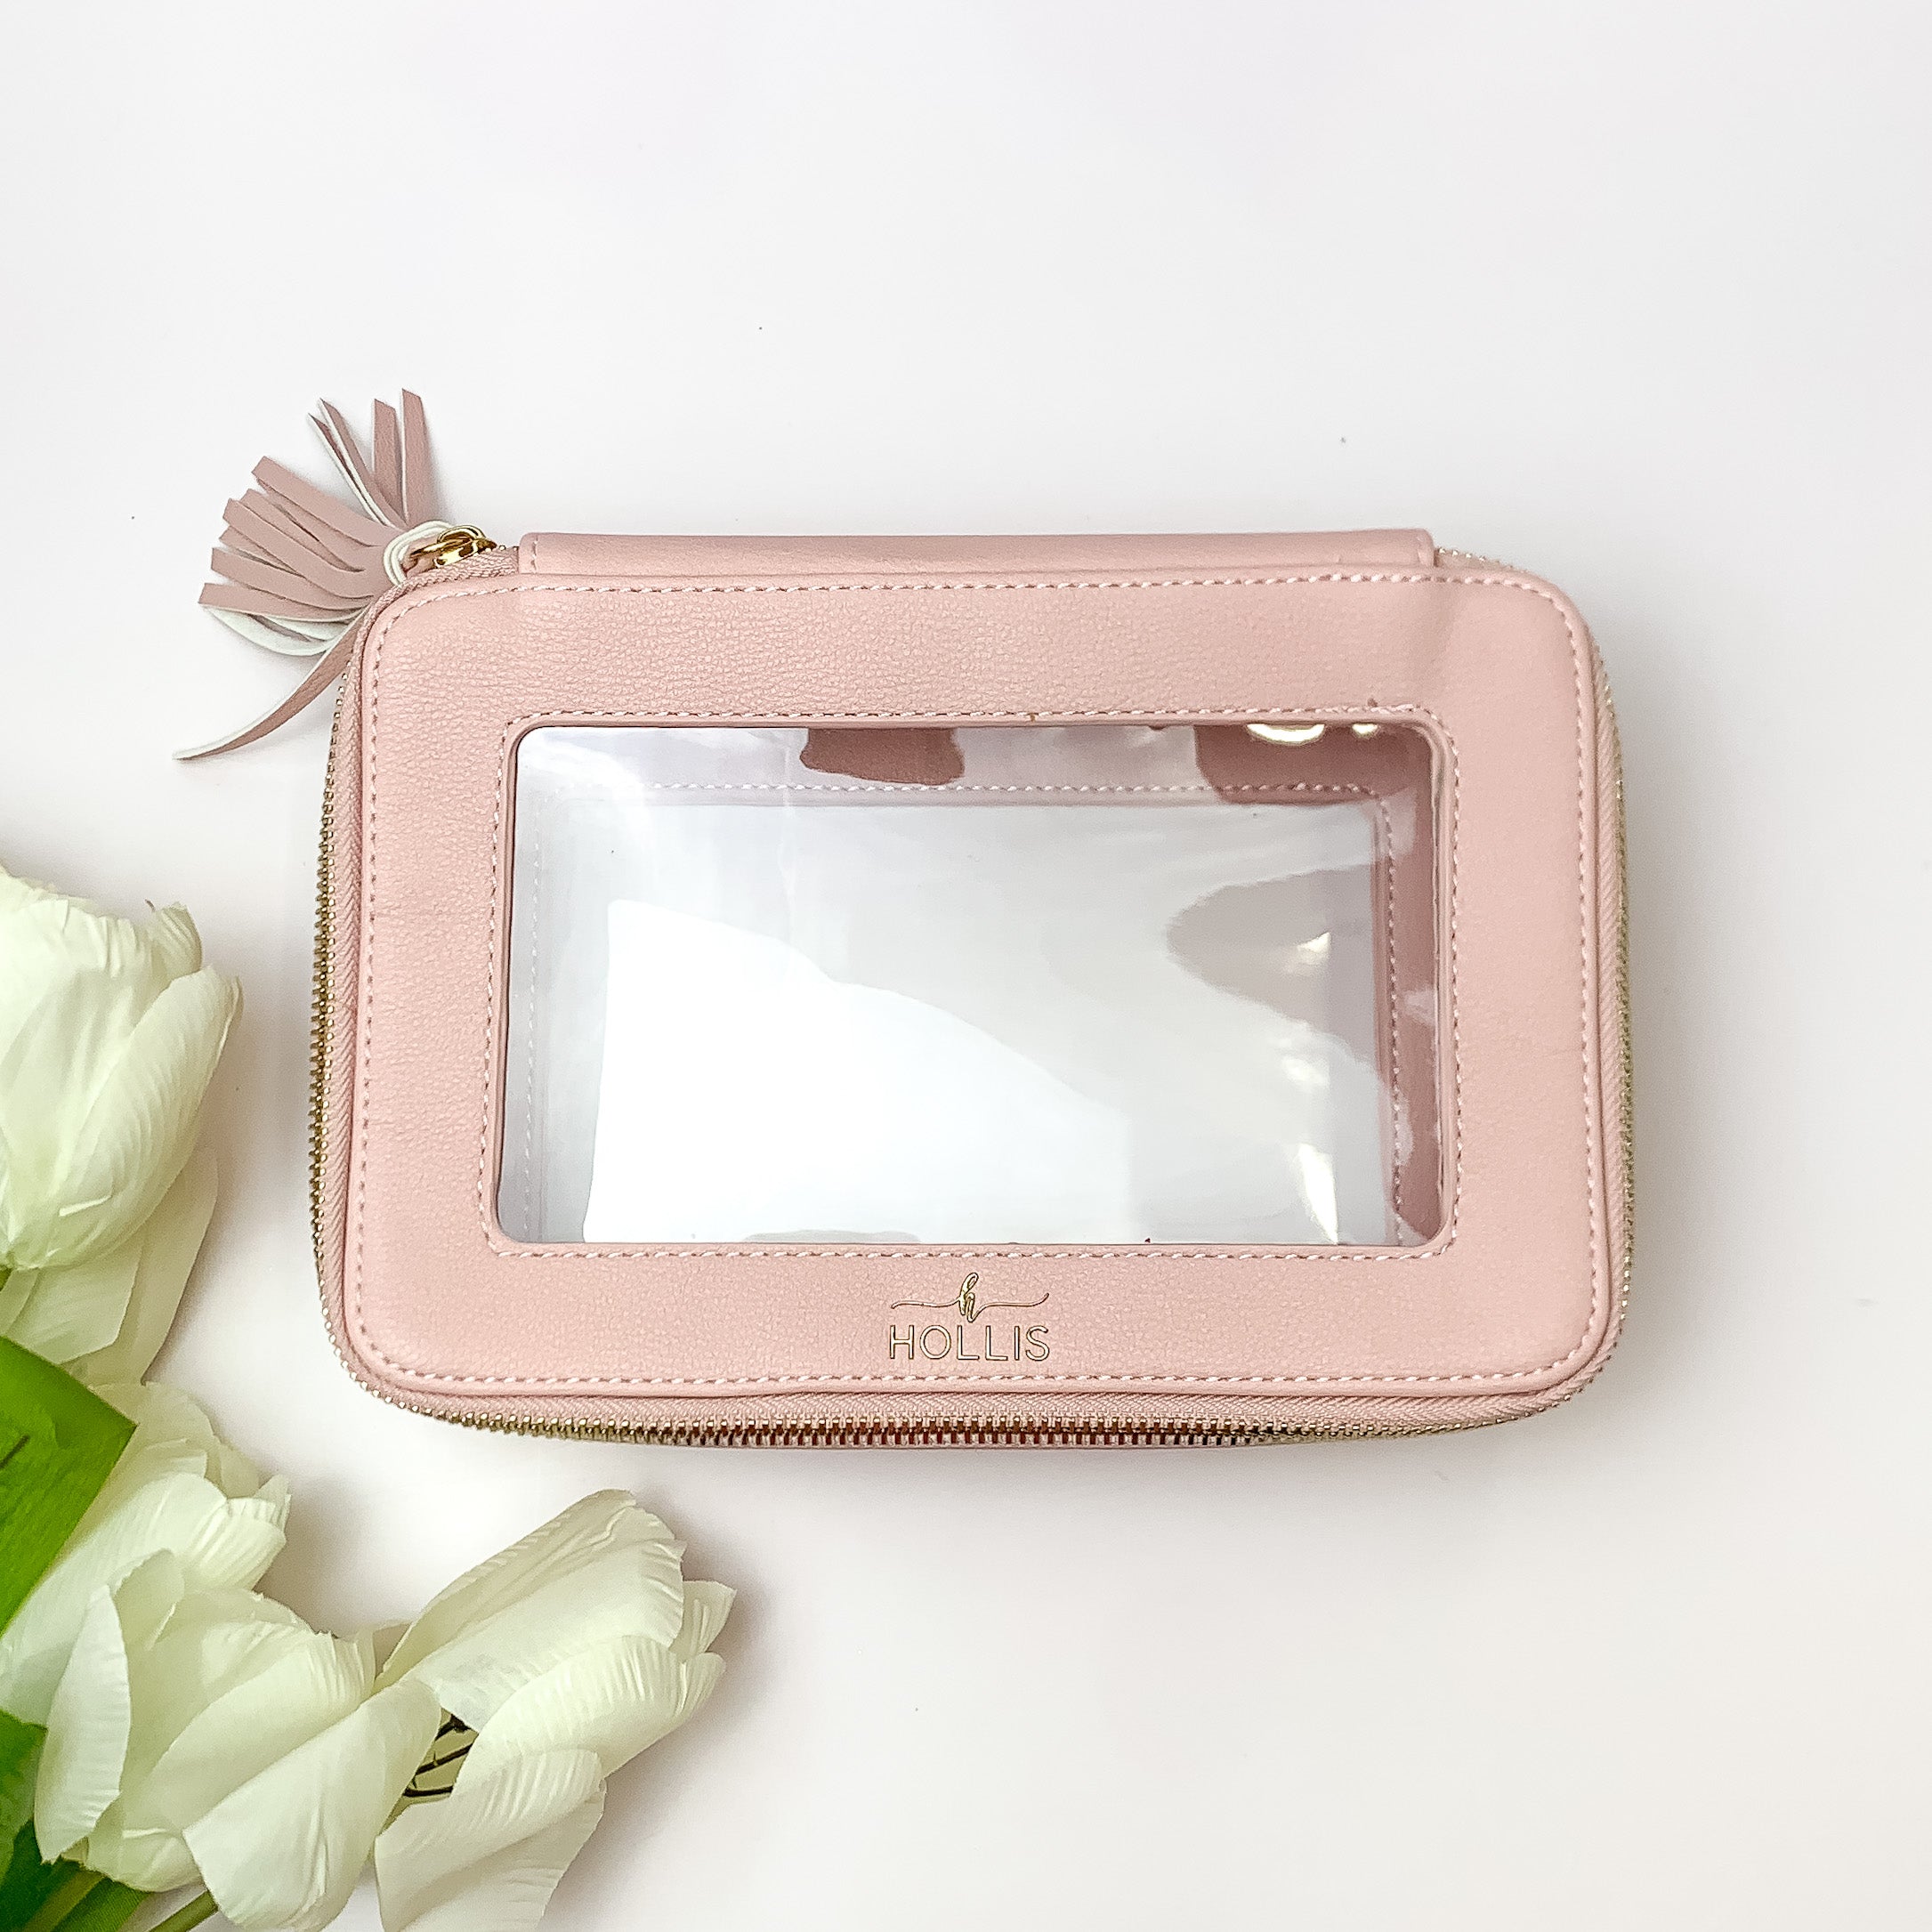 Blush pink and clear rectangle toiletry bag pictured on a white background with white flowers on the bottom left corner. 